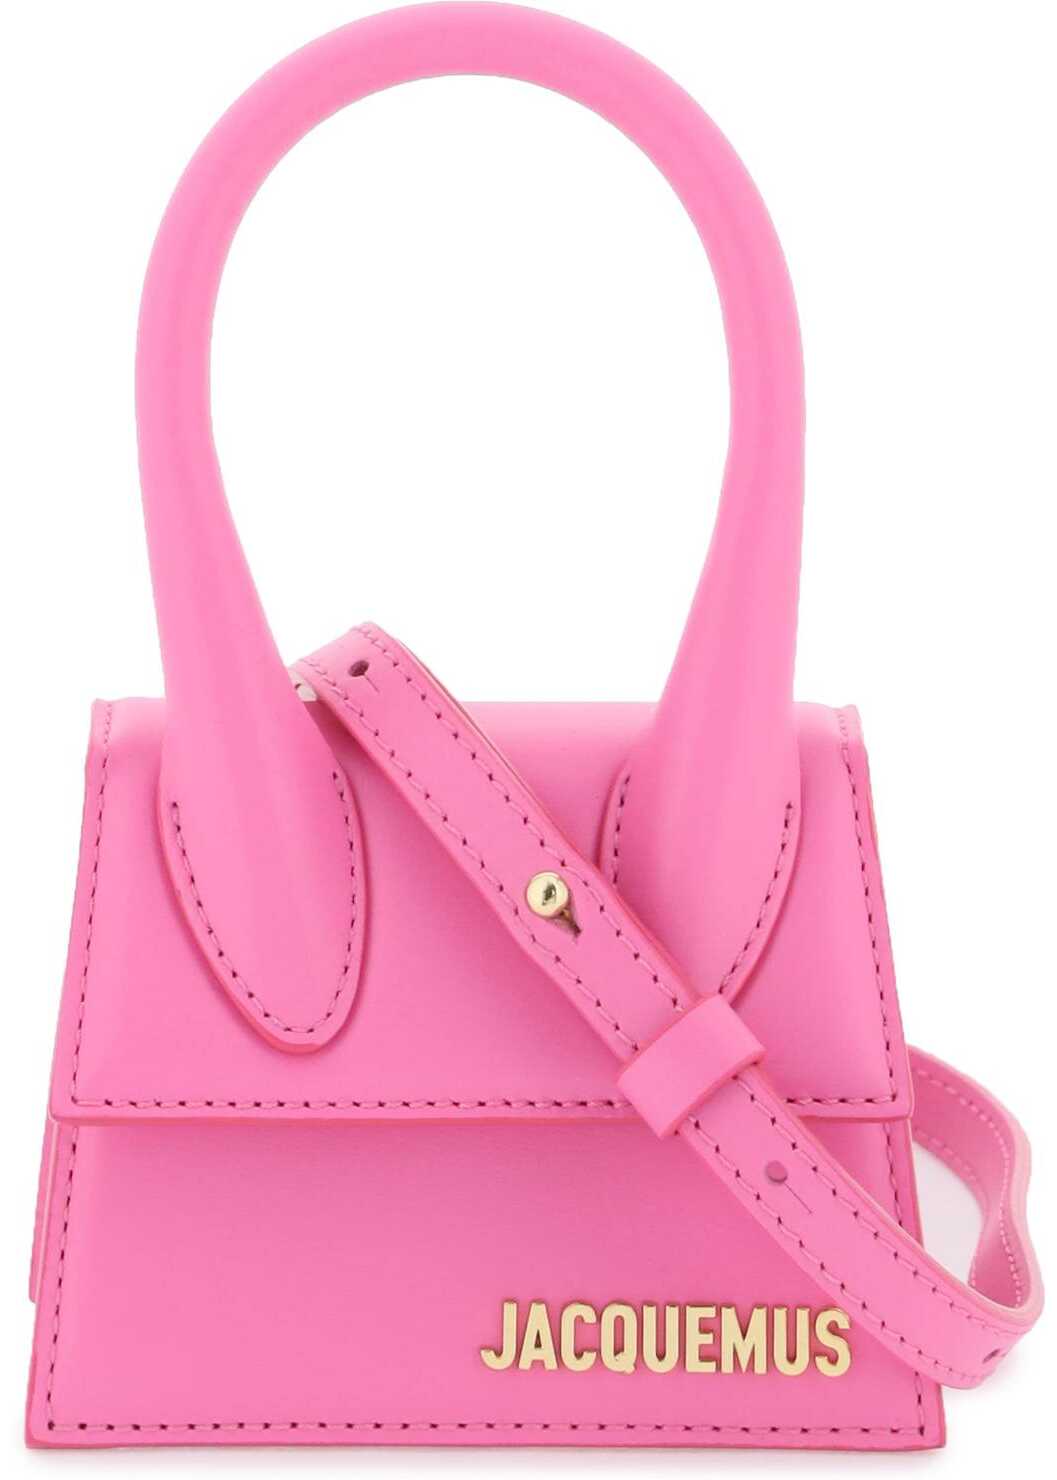 JACQUEMUS \'Le Chiquito\' Micro Bag NEON PINK